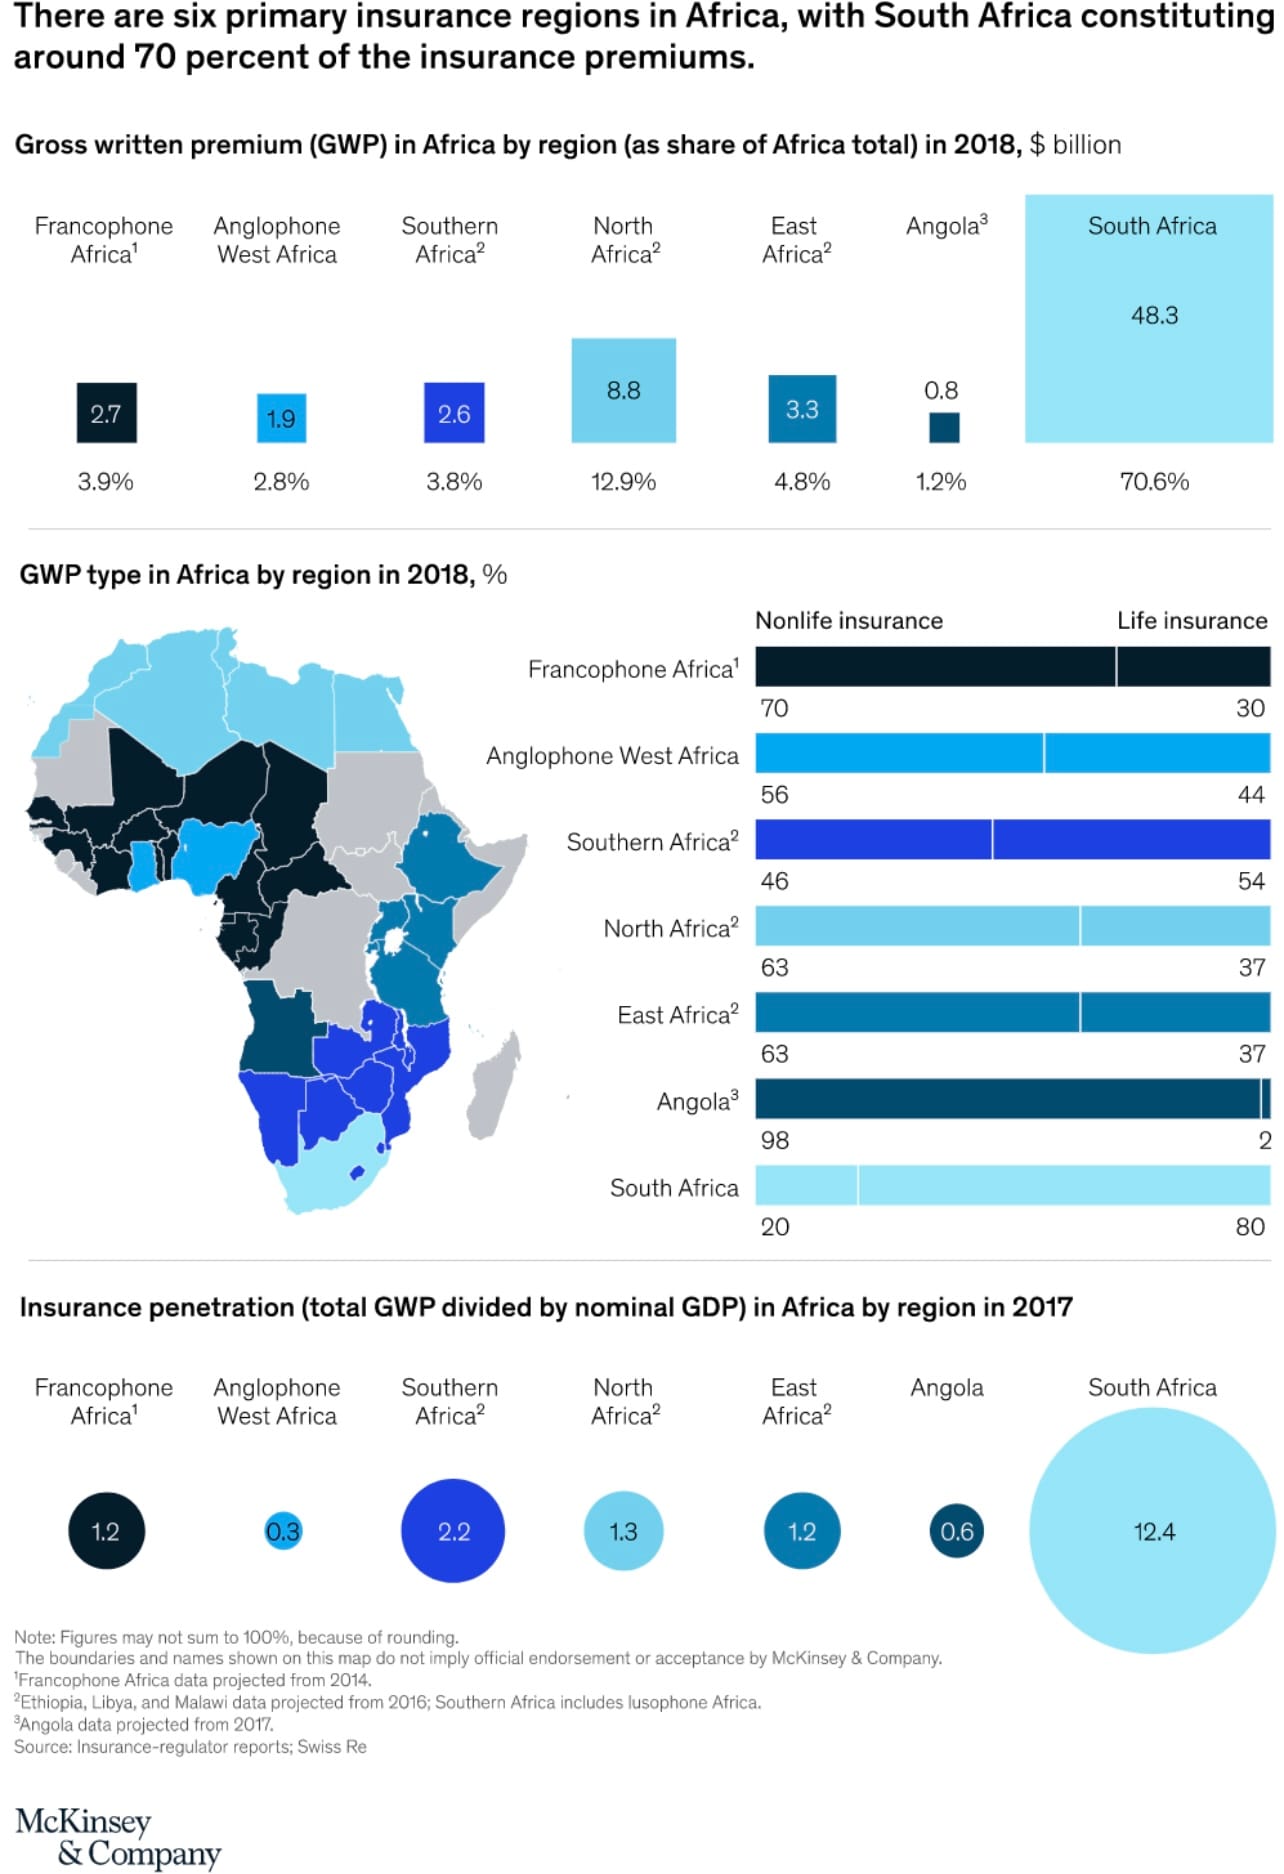 $44 M + $70M = African Fintechs are raising, VCs are deploying (TWIF - Africa 04/15)